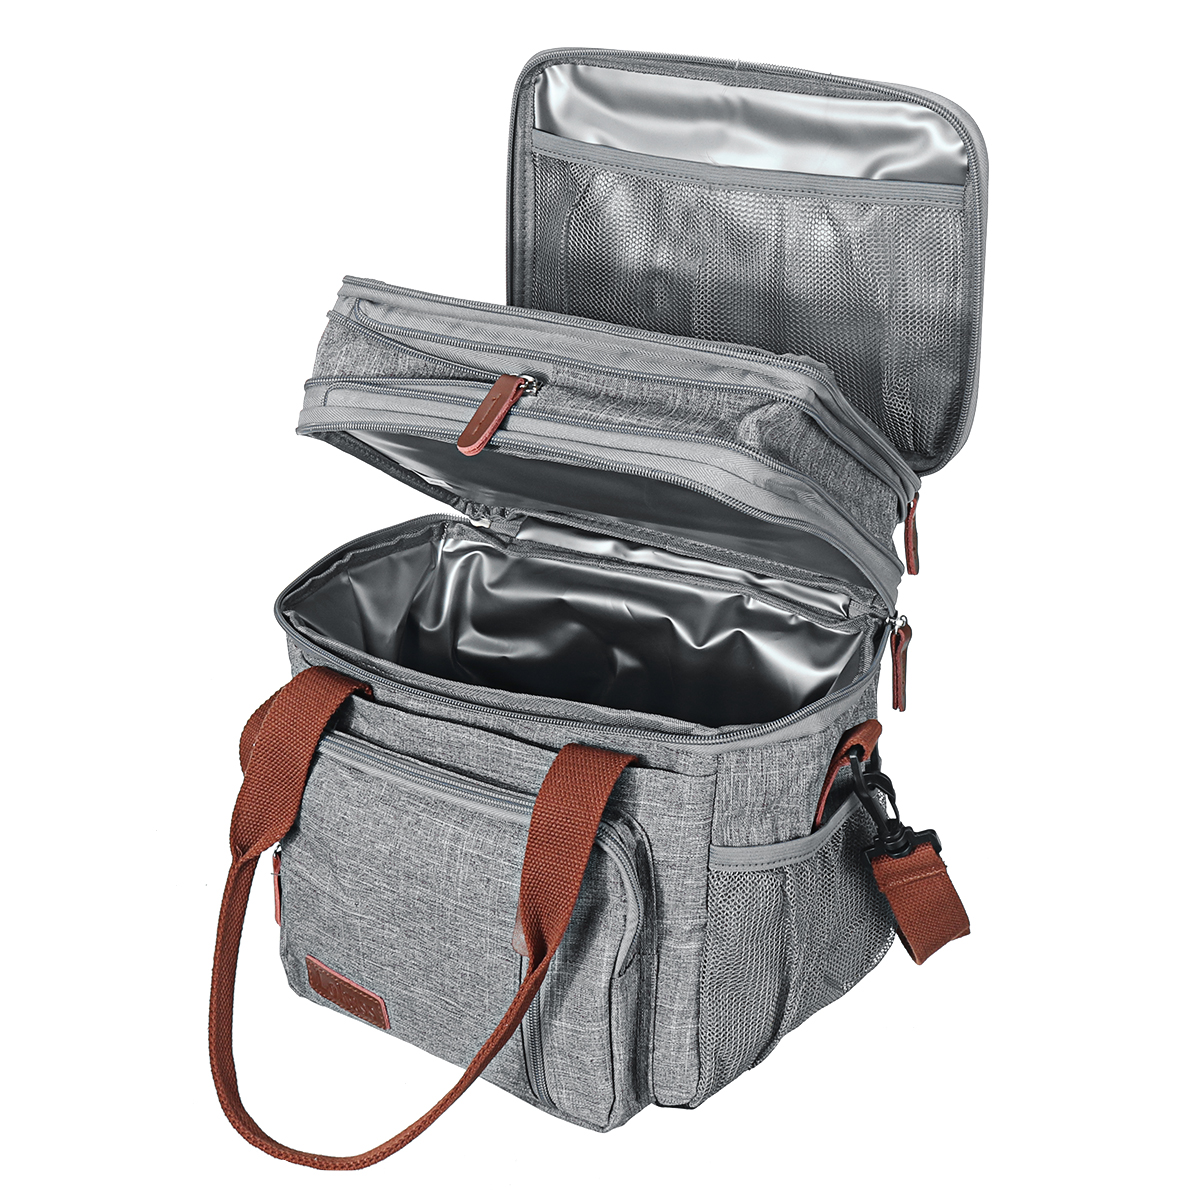 Expandable-Large-Capacity-with-Multiple-Pockets-Leak-proof-Drinks-Lunch-Insulated-Bag-Picnic-Storage-1863622-4